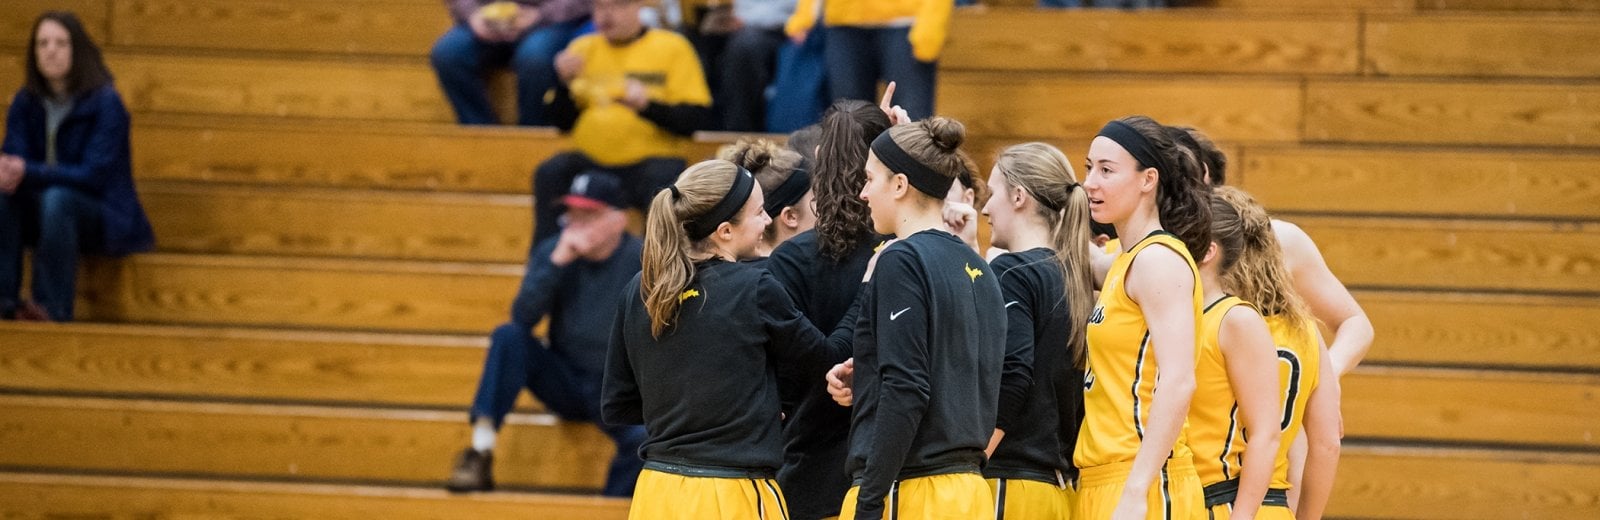 Michigan Technological University Women's Basketball Team huddles for a quick strategy session on the basketball court. 